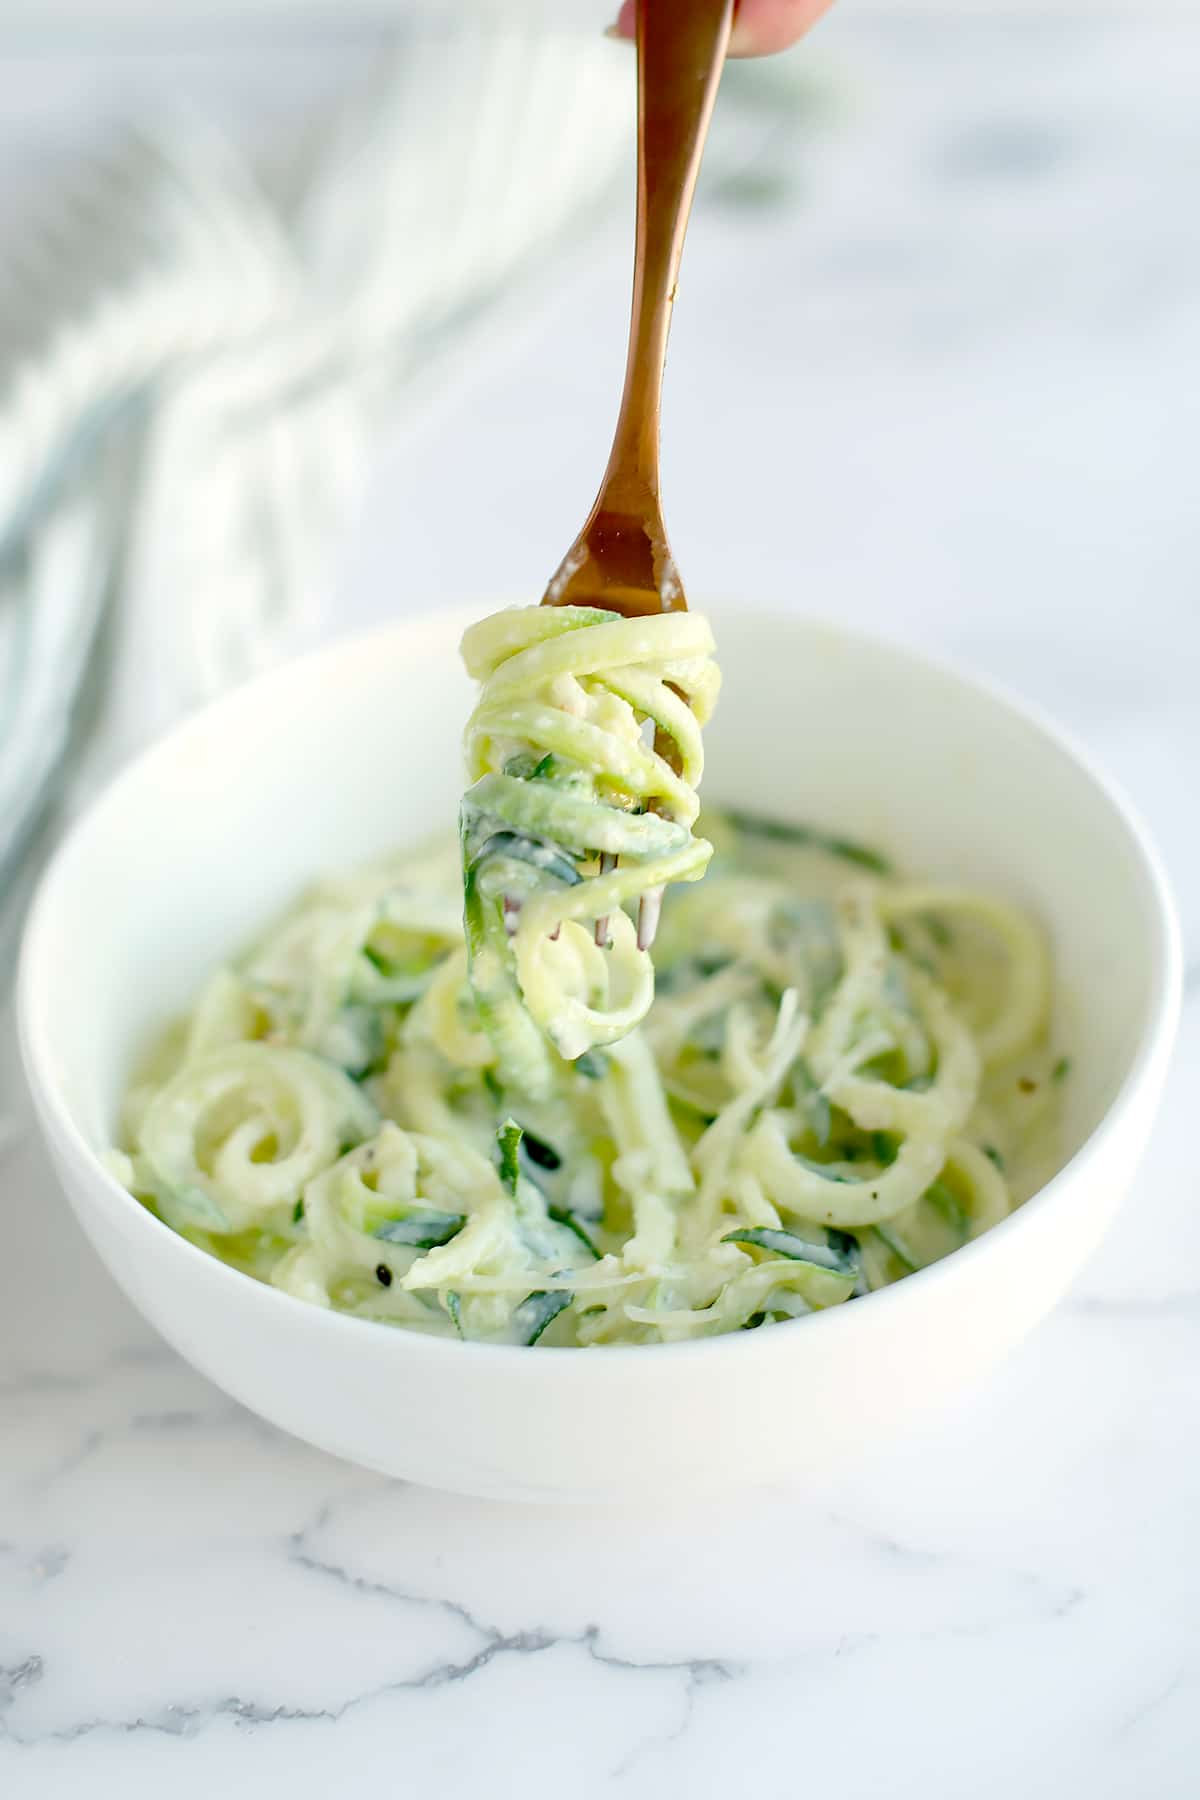 Zucchini noodles in homemade alfredo sauce in a white bowl with a copper fork.